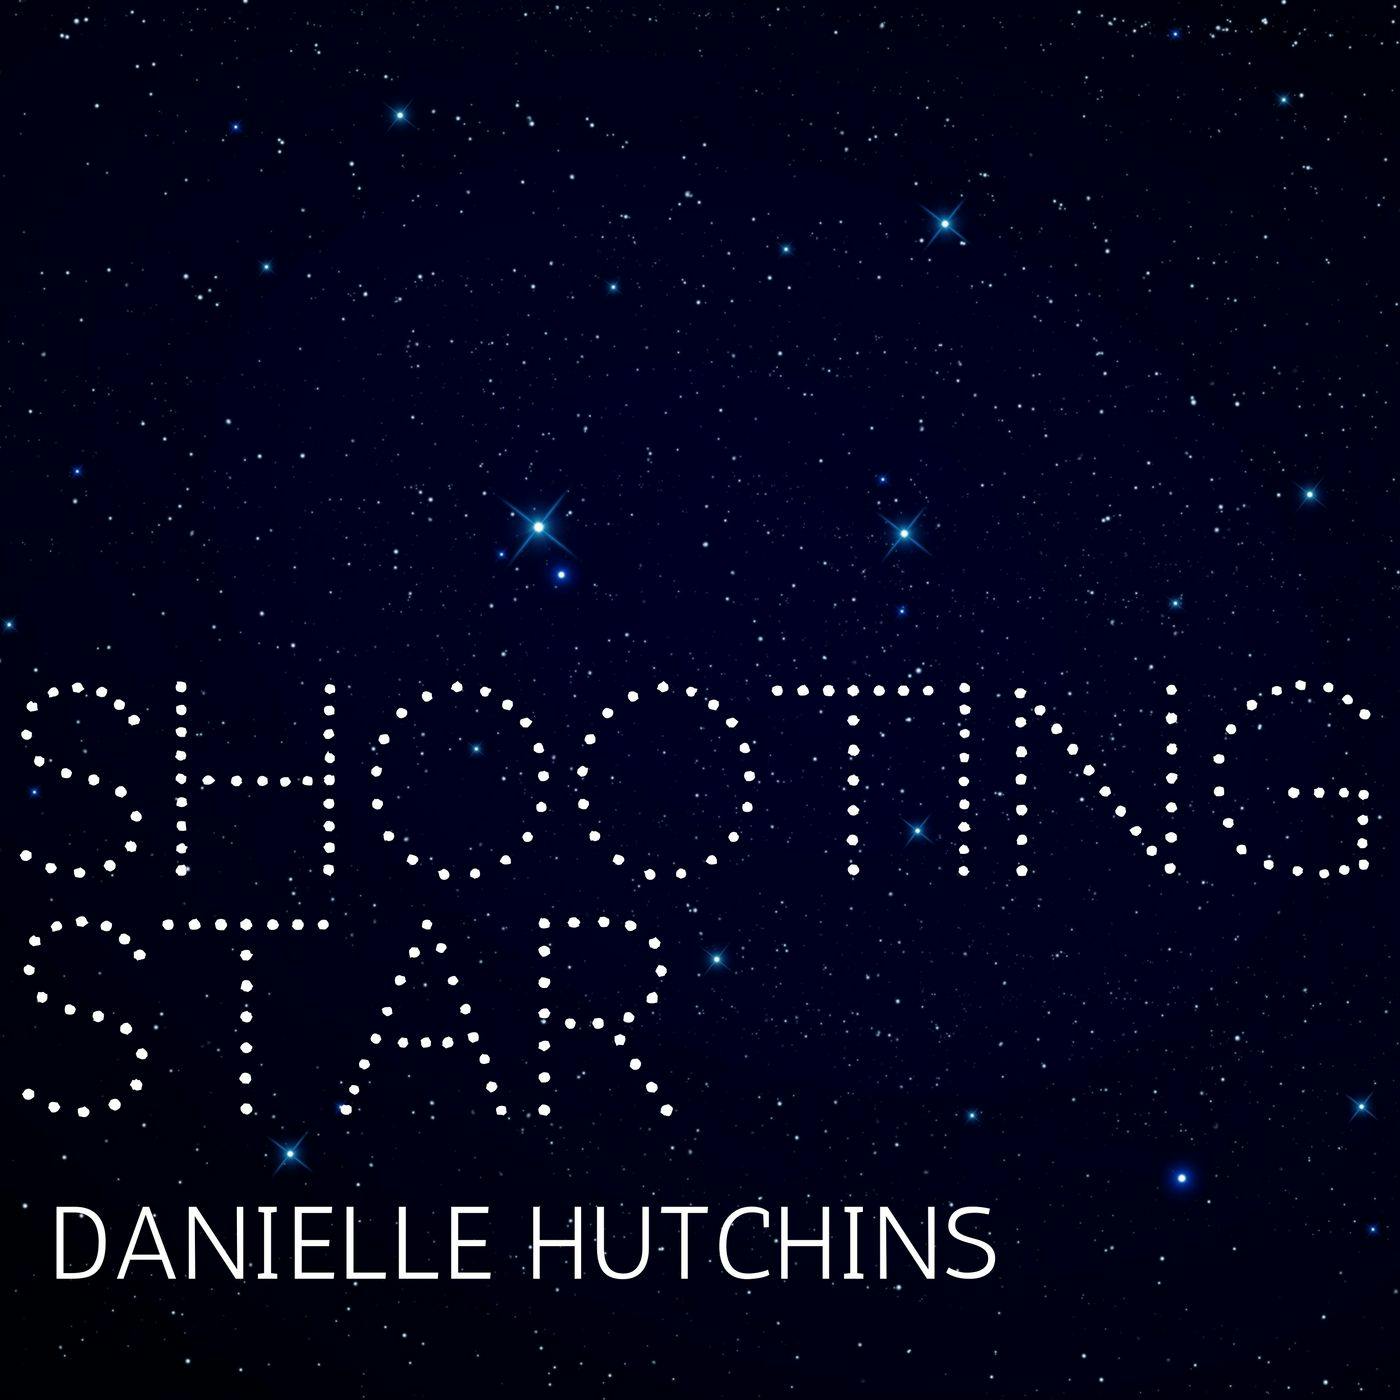 Danielle Hutchins - Shooting Star Official Music Video Banner Image